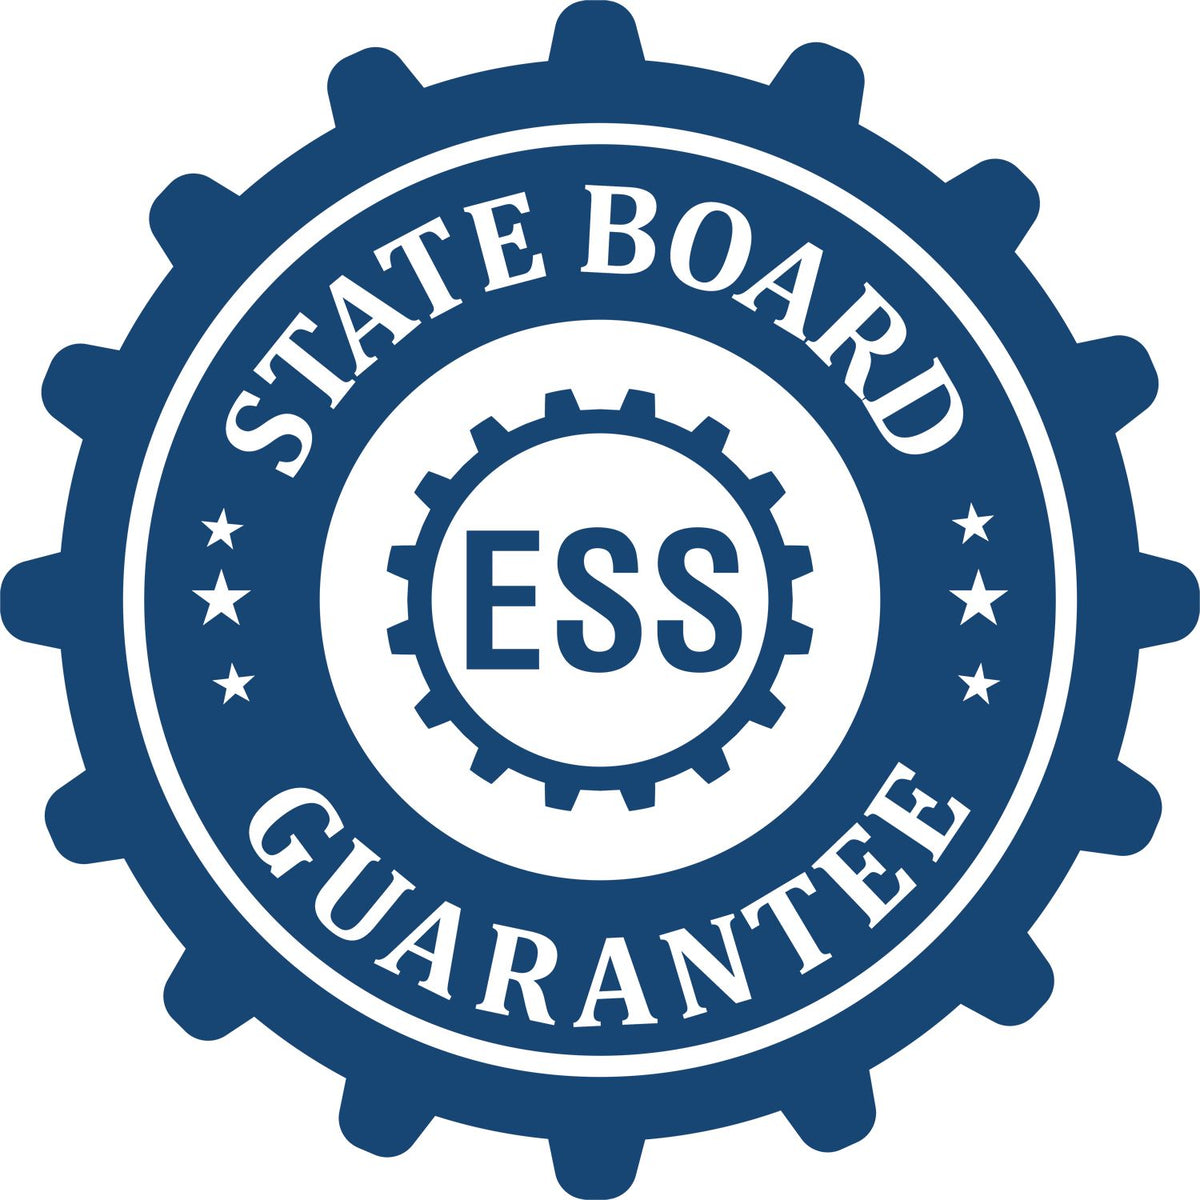 An emblem in a gear shape illustrating a state board guarantee for the State of Delaware Extended Long Reach Geologist Seal